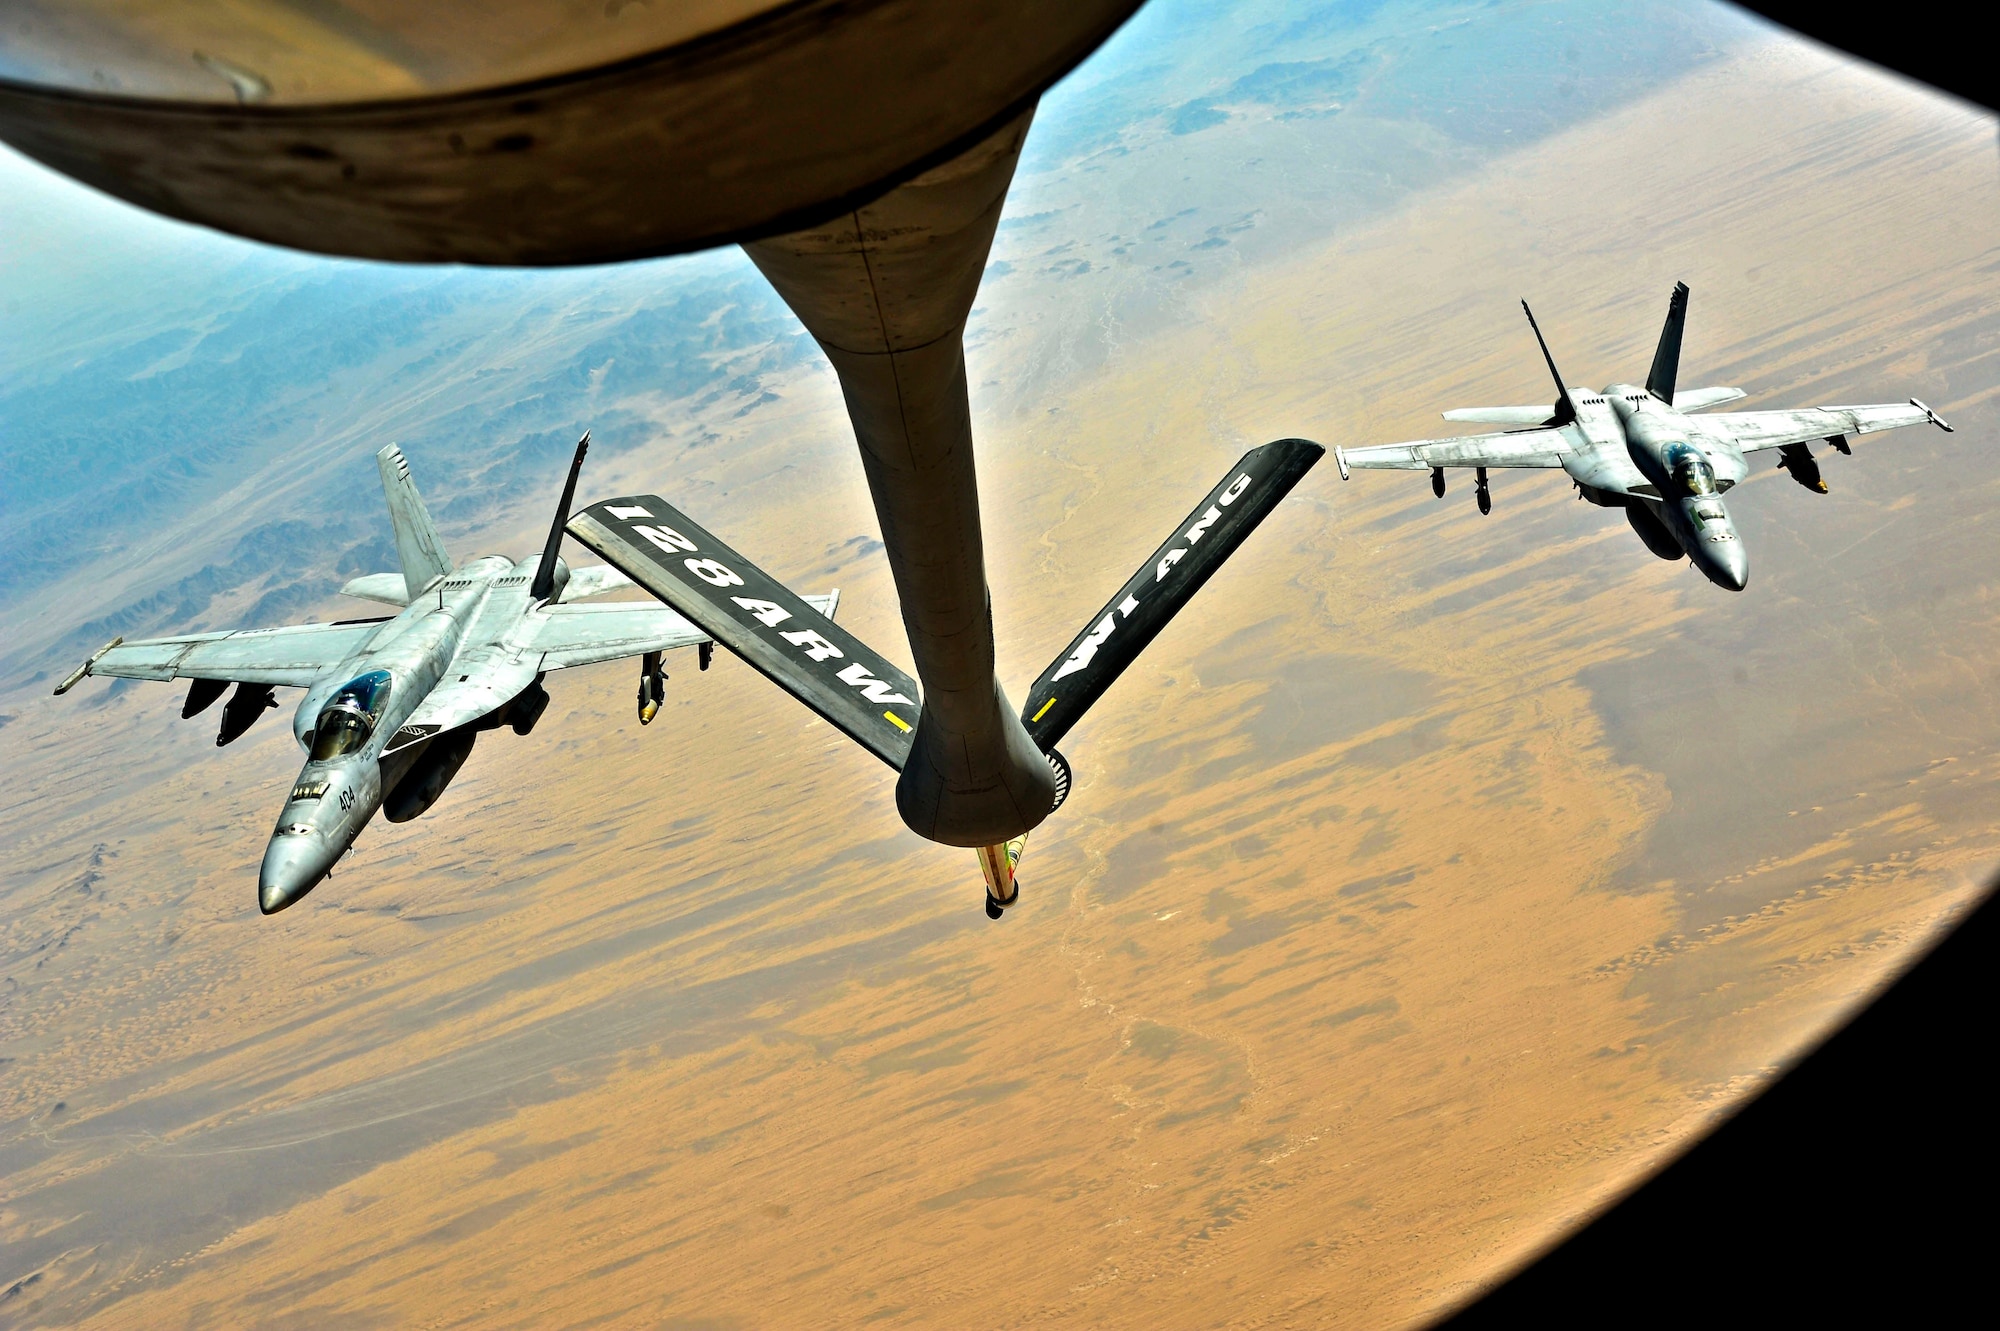 Two U.S. Navy F/A-18 Hornets maneuver behind a KC-135 Stratotanker for refueling in Southwest Asia, Oct. 1, 2013. The aircraft is assigned to the 340th Expeditionary Air Refueling Squadron deployed from the 128th Air Refueling Wing (Wisconsin Air National Guard), in Milwaukee.  (U.S. Air Force photo/Tech. Sgt. Joselito Aribuabo)